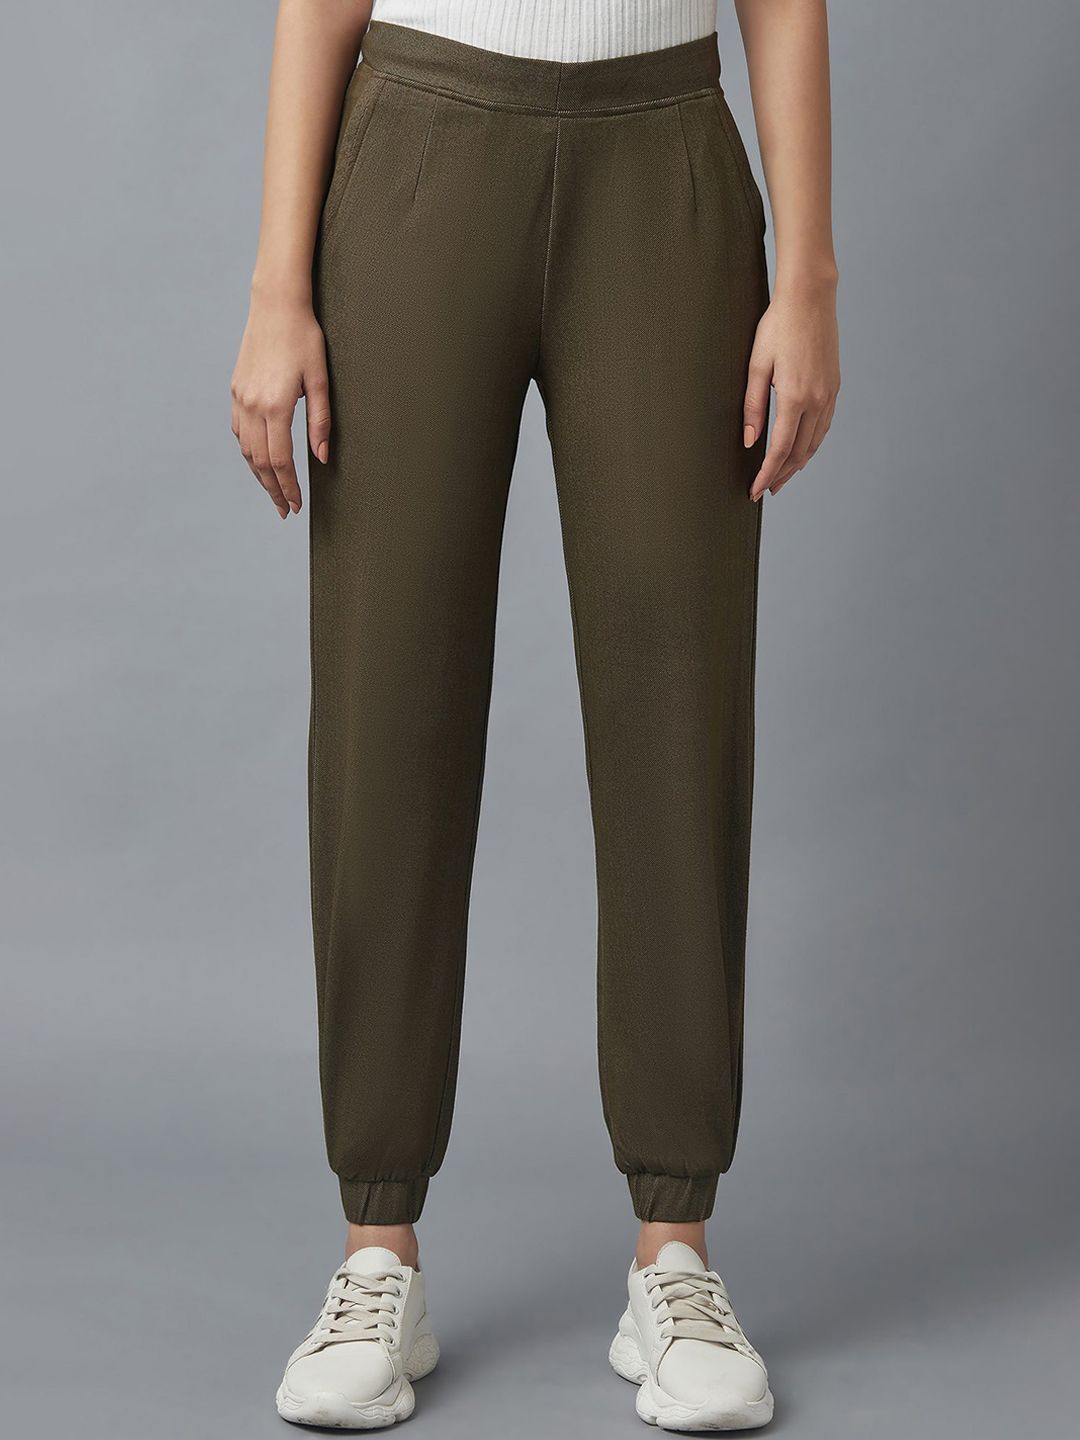 elleven Women Olive Green Joggers Trousers Price in India